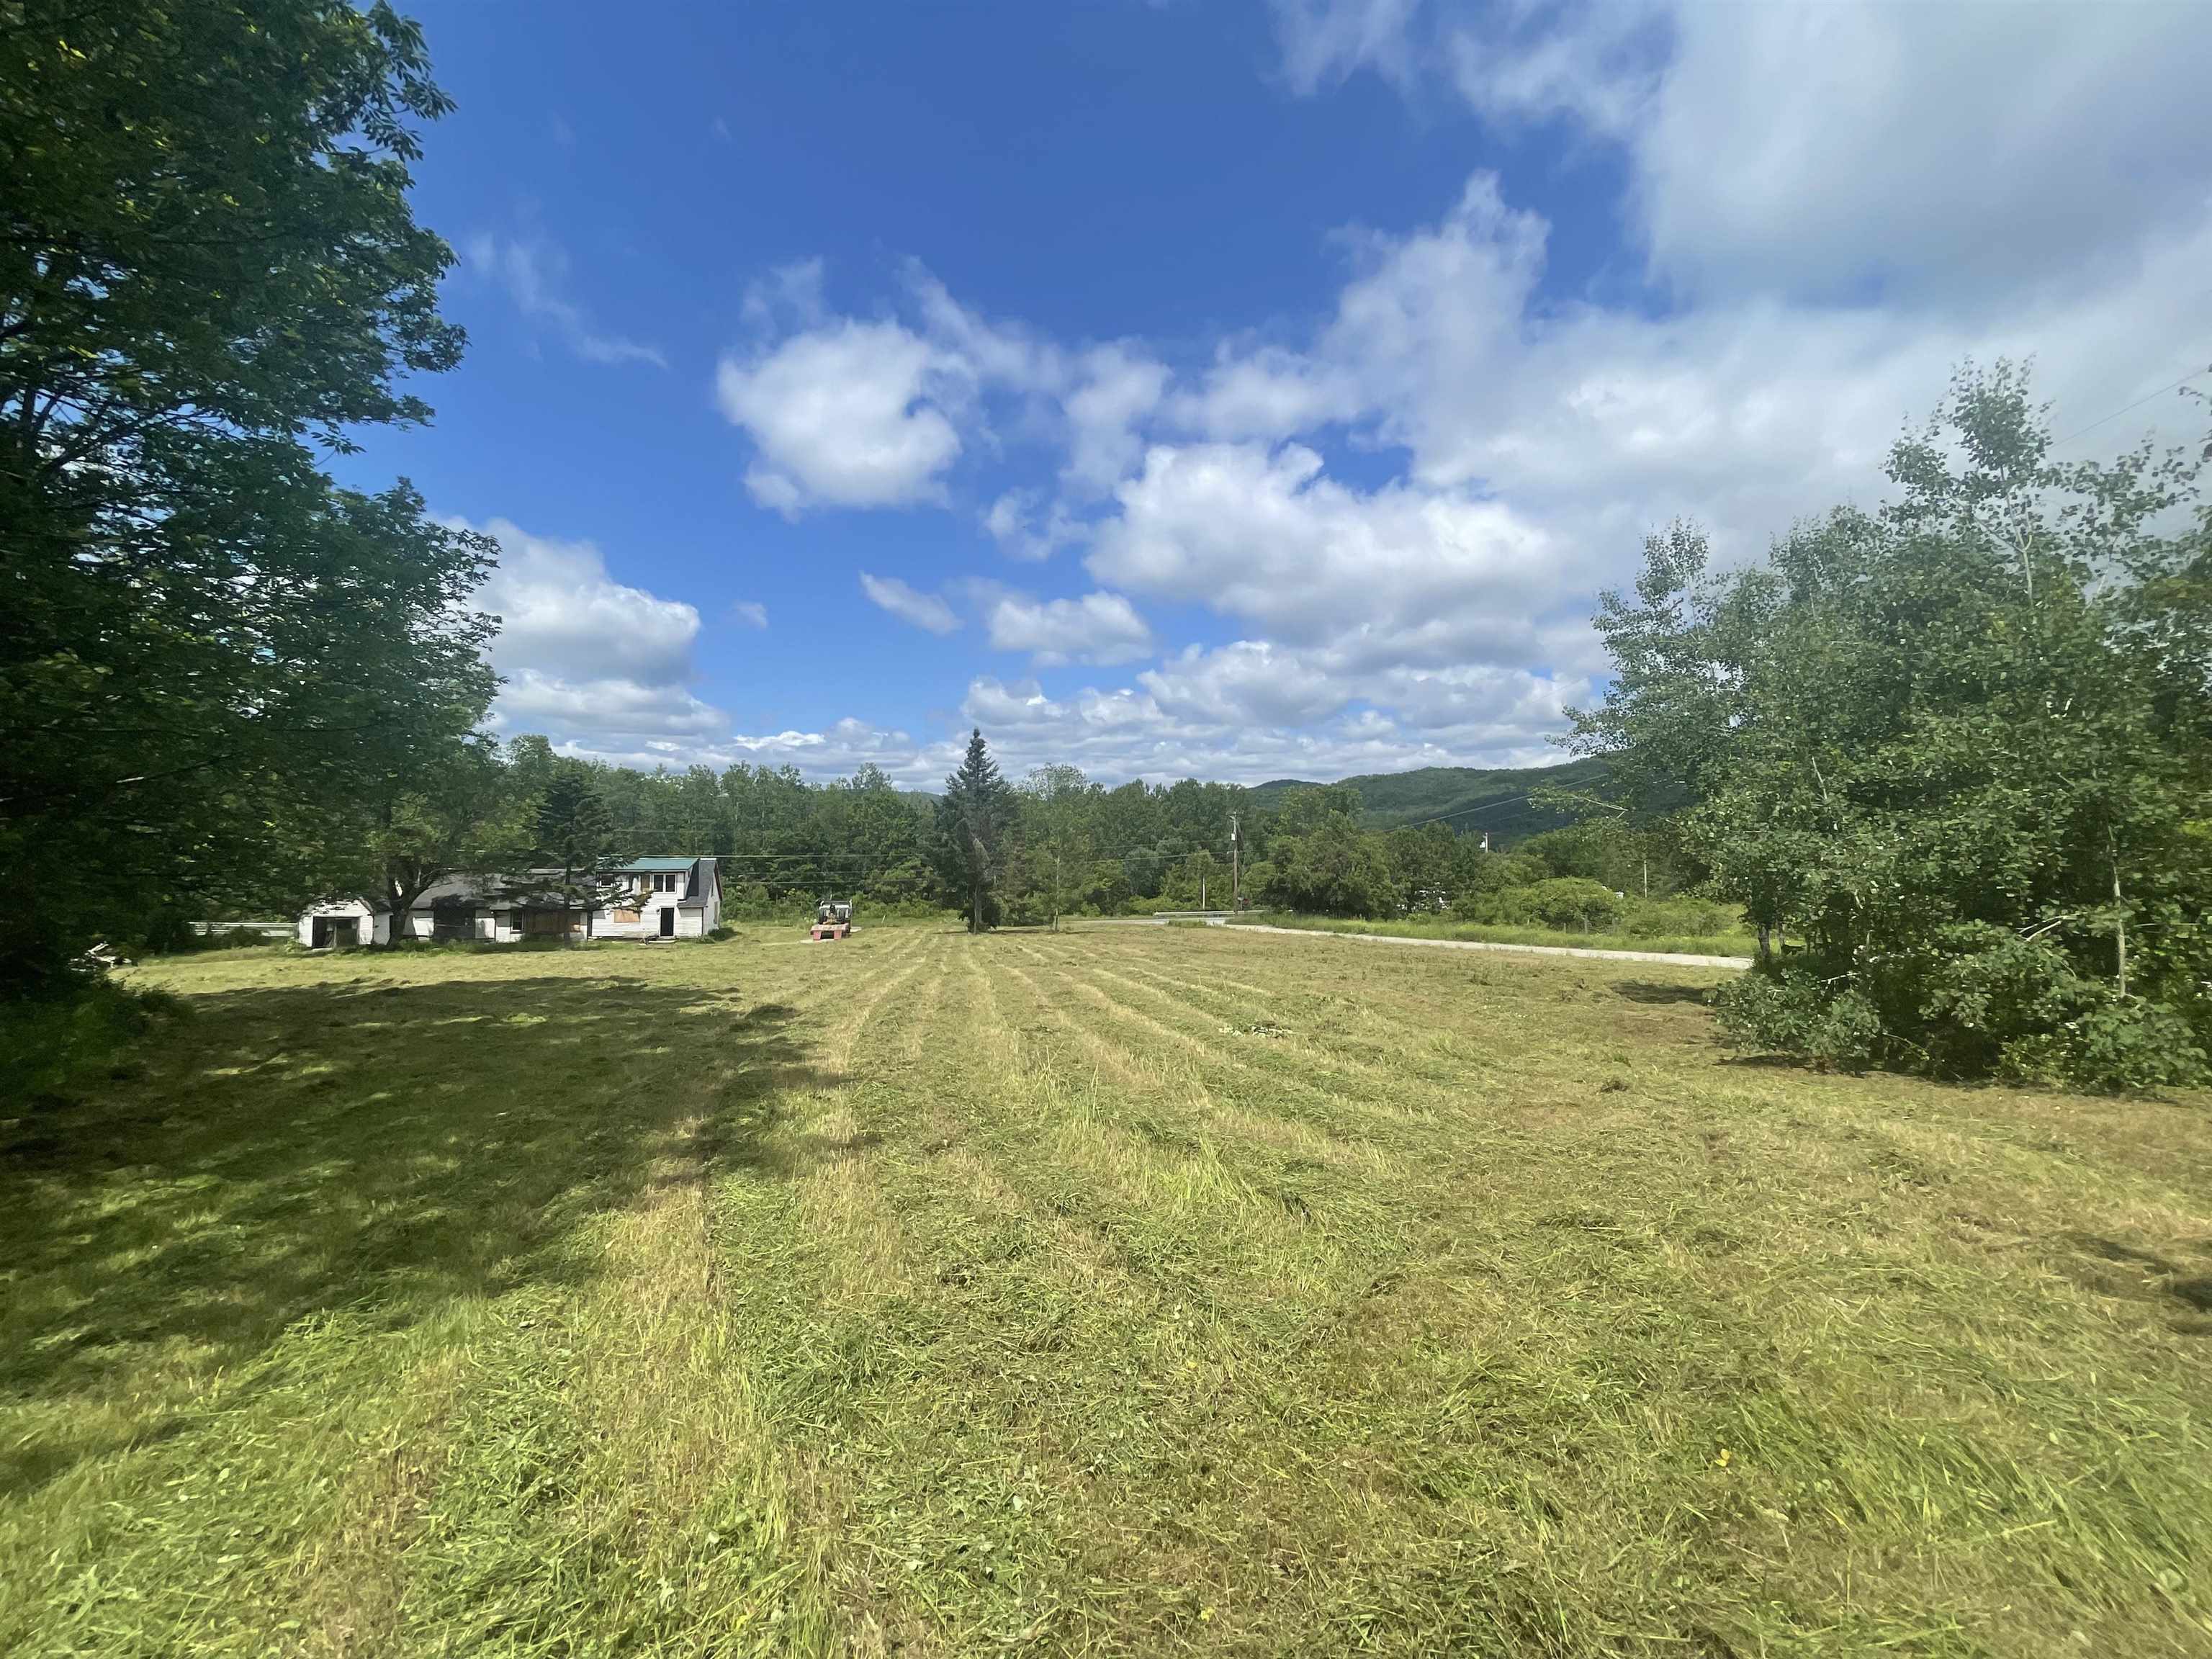 TOWNSHEND VT Commercial Property for sale $$190,000 | $90 per sq.ft.